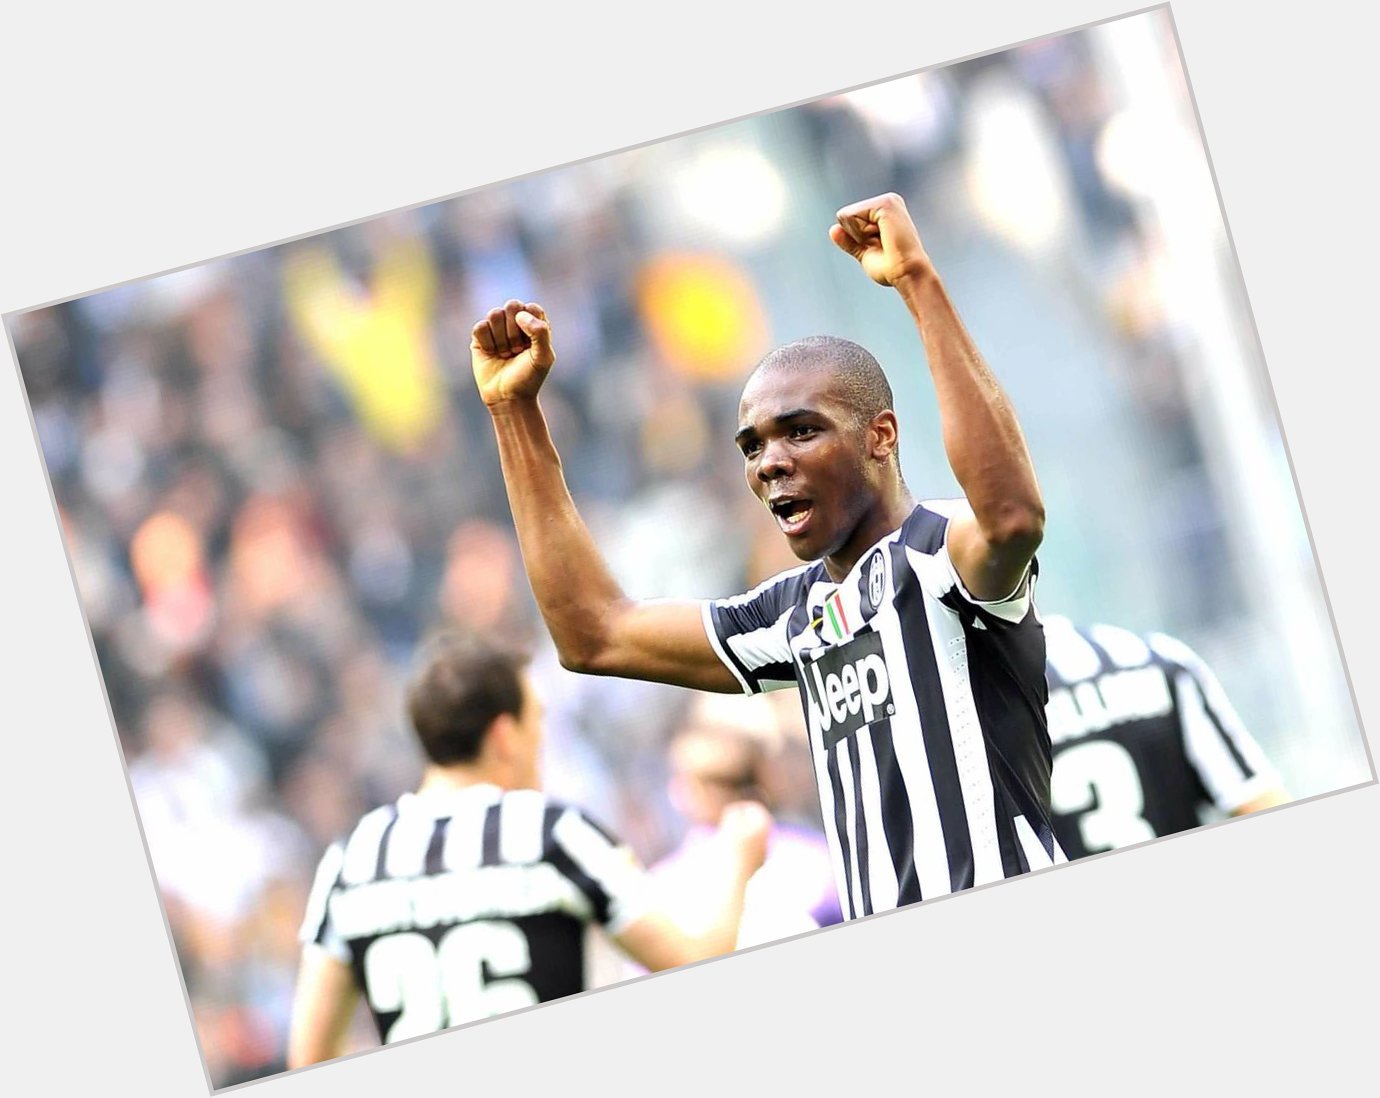 Happy birthday to former Juventus defender Angelo Ogbonna, who turns 30 today.

Games: 55 : 4 